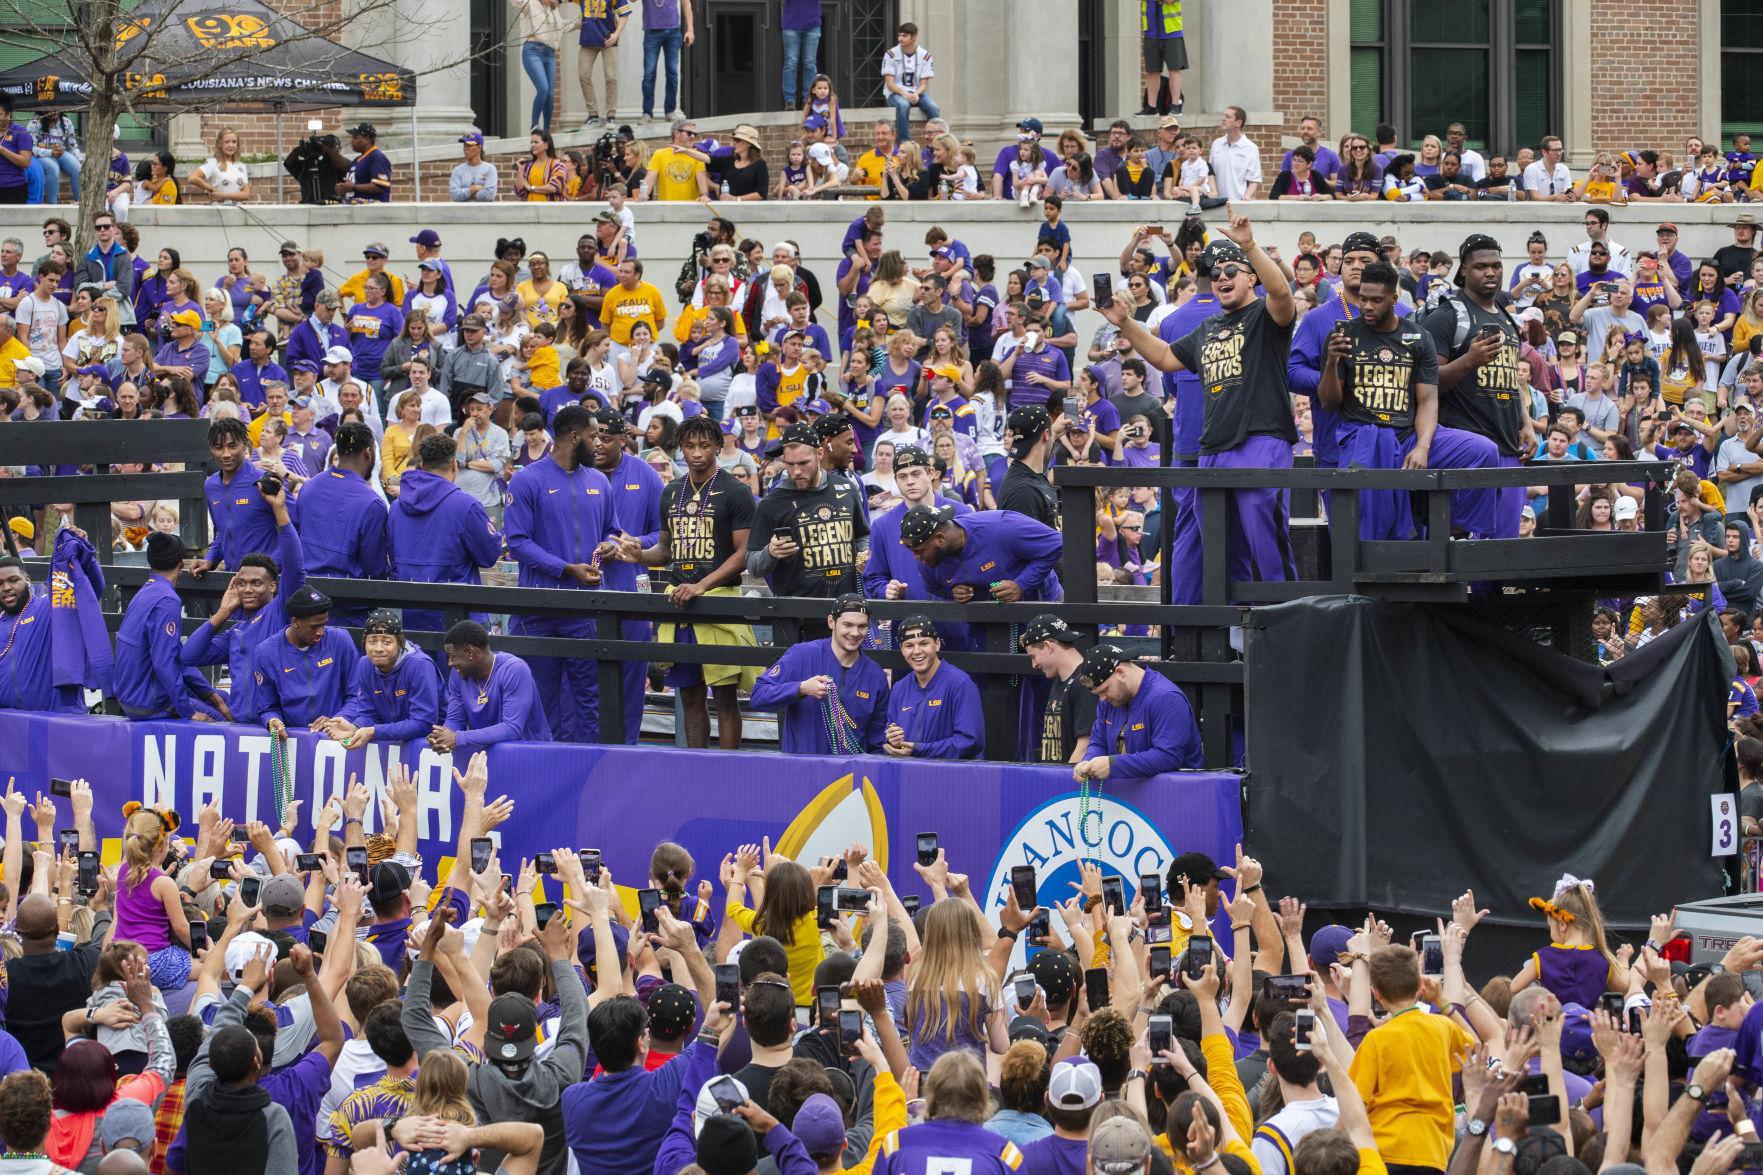 Scenes from LSU's national championship parade and celebration 'The